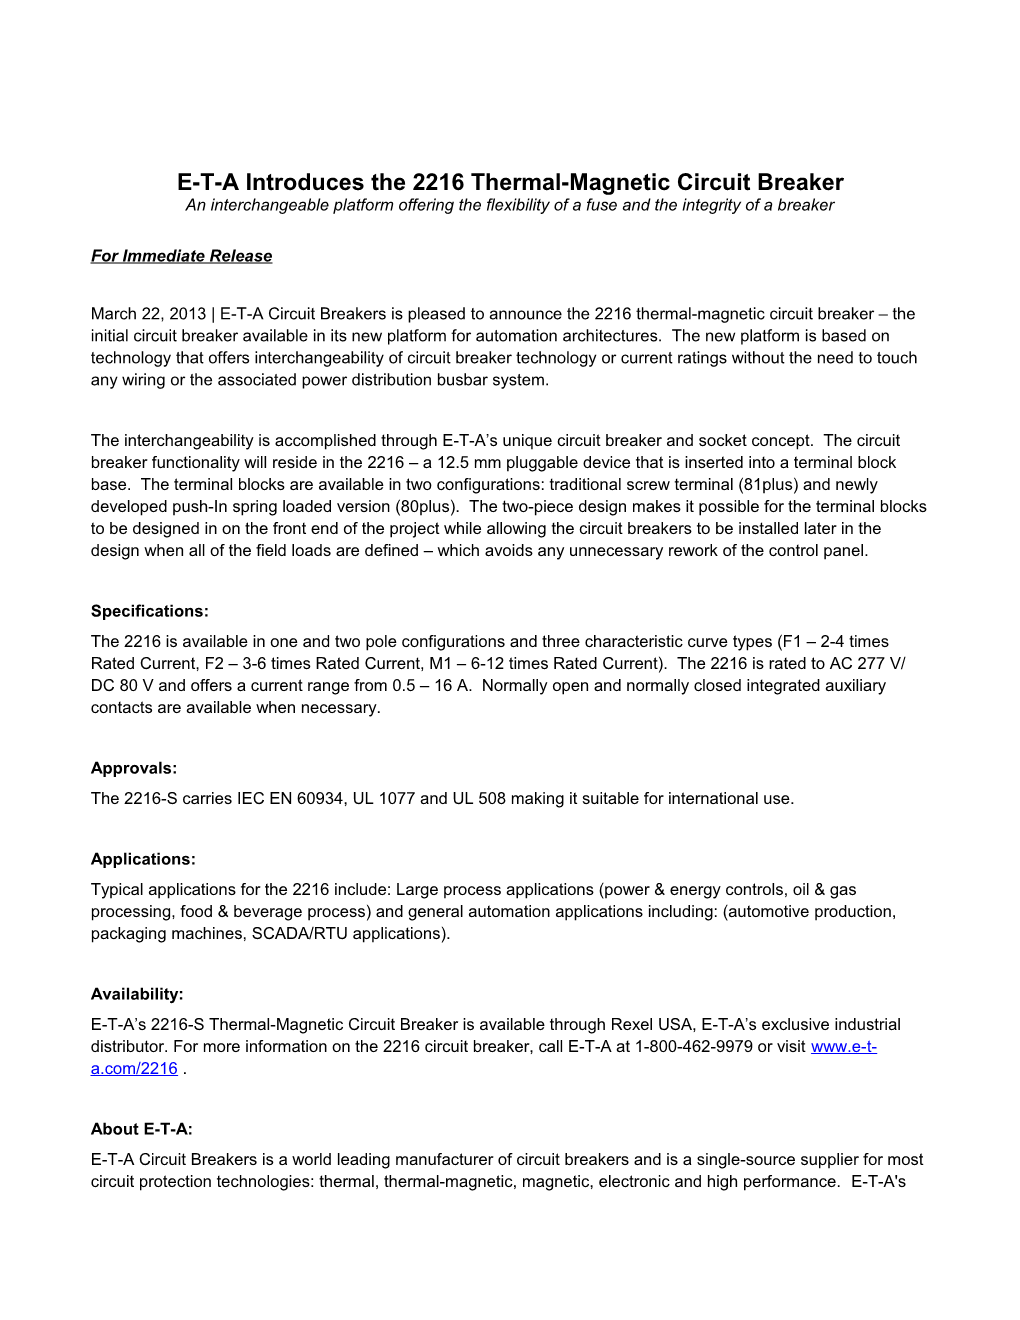 E-T-A Introduces the 2216 Thermal-Magnetic Circuit Breaker